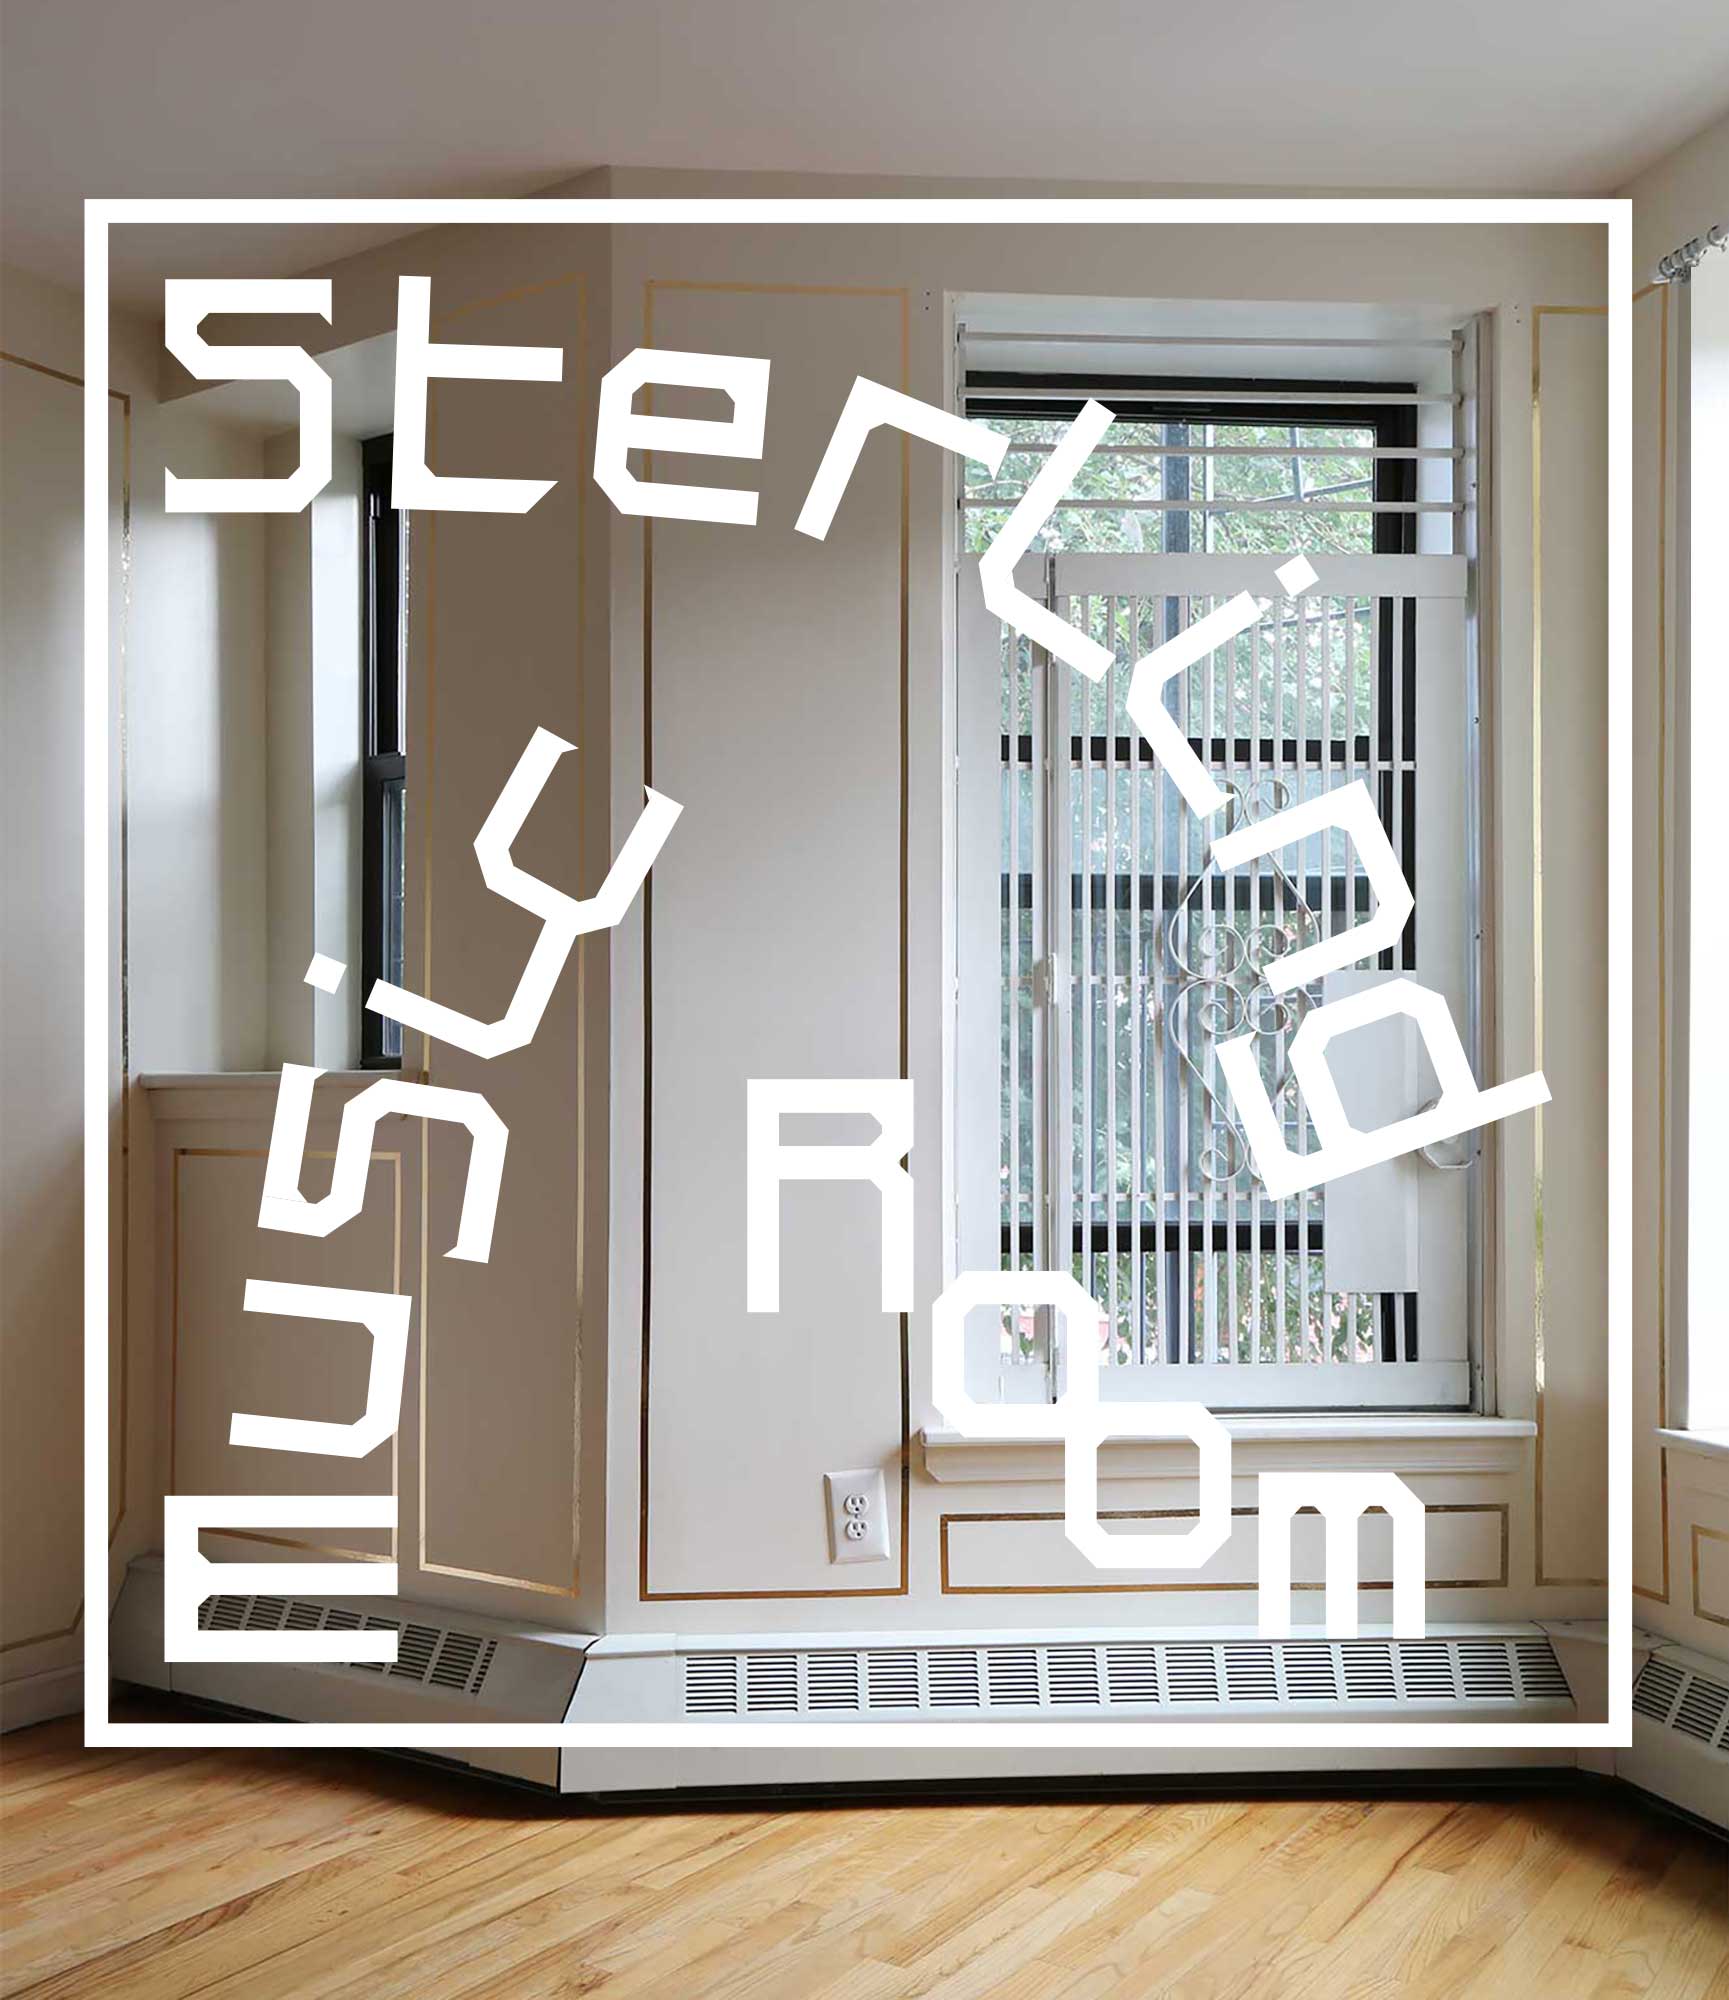 Claudia Weber Sterling Music Room - A Yearlong Salon